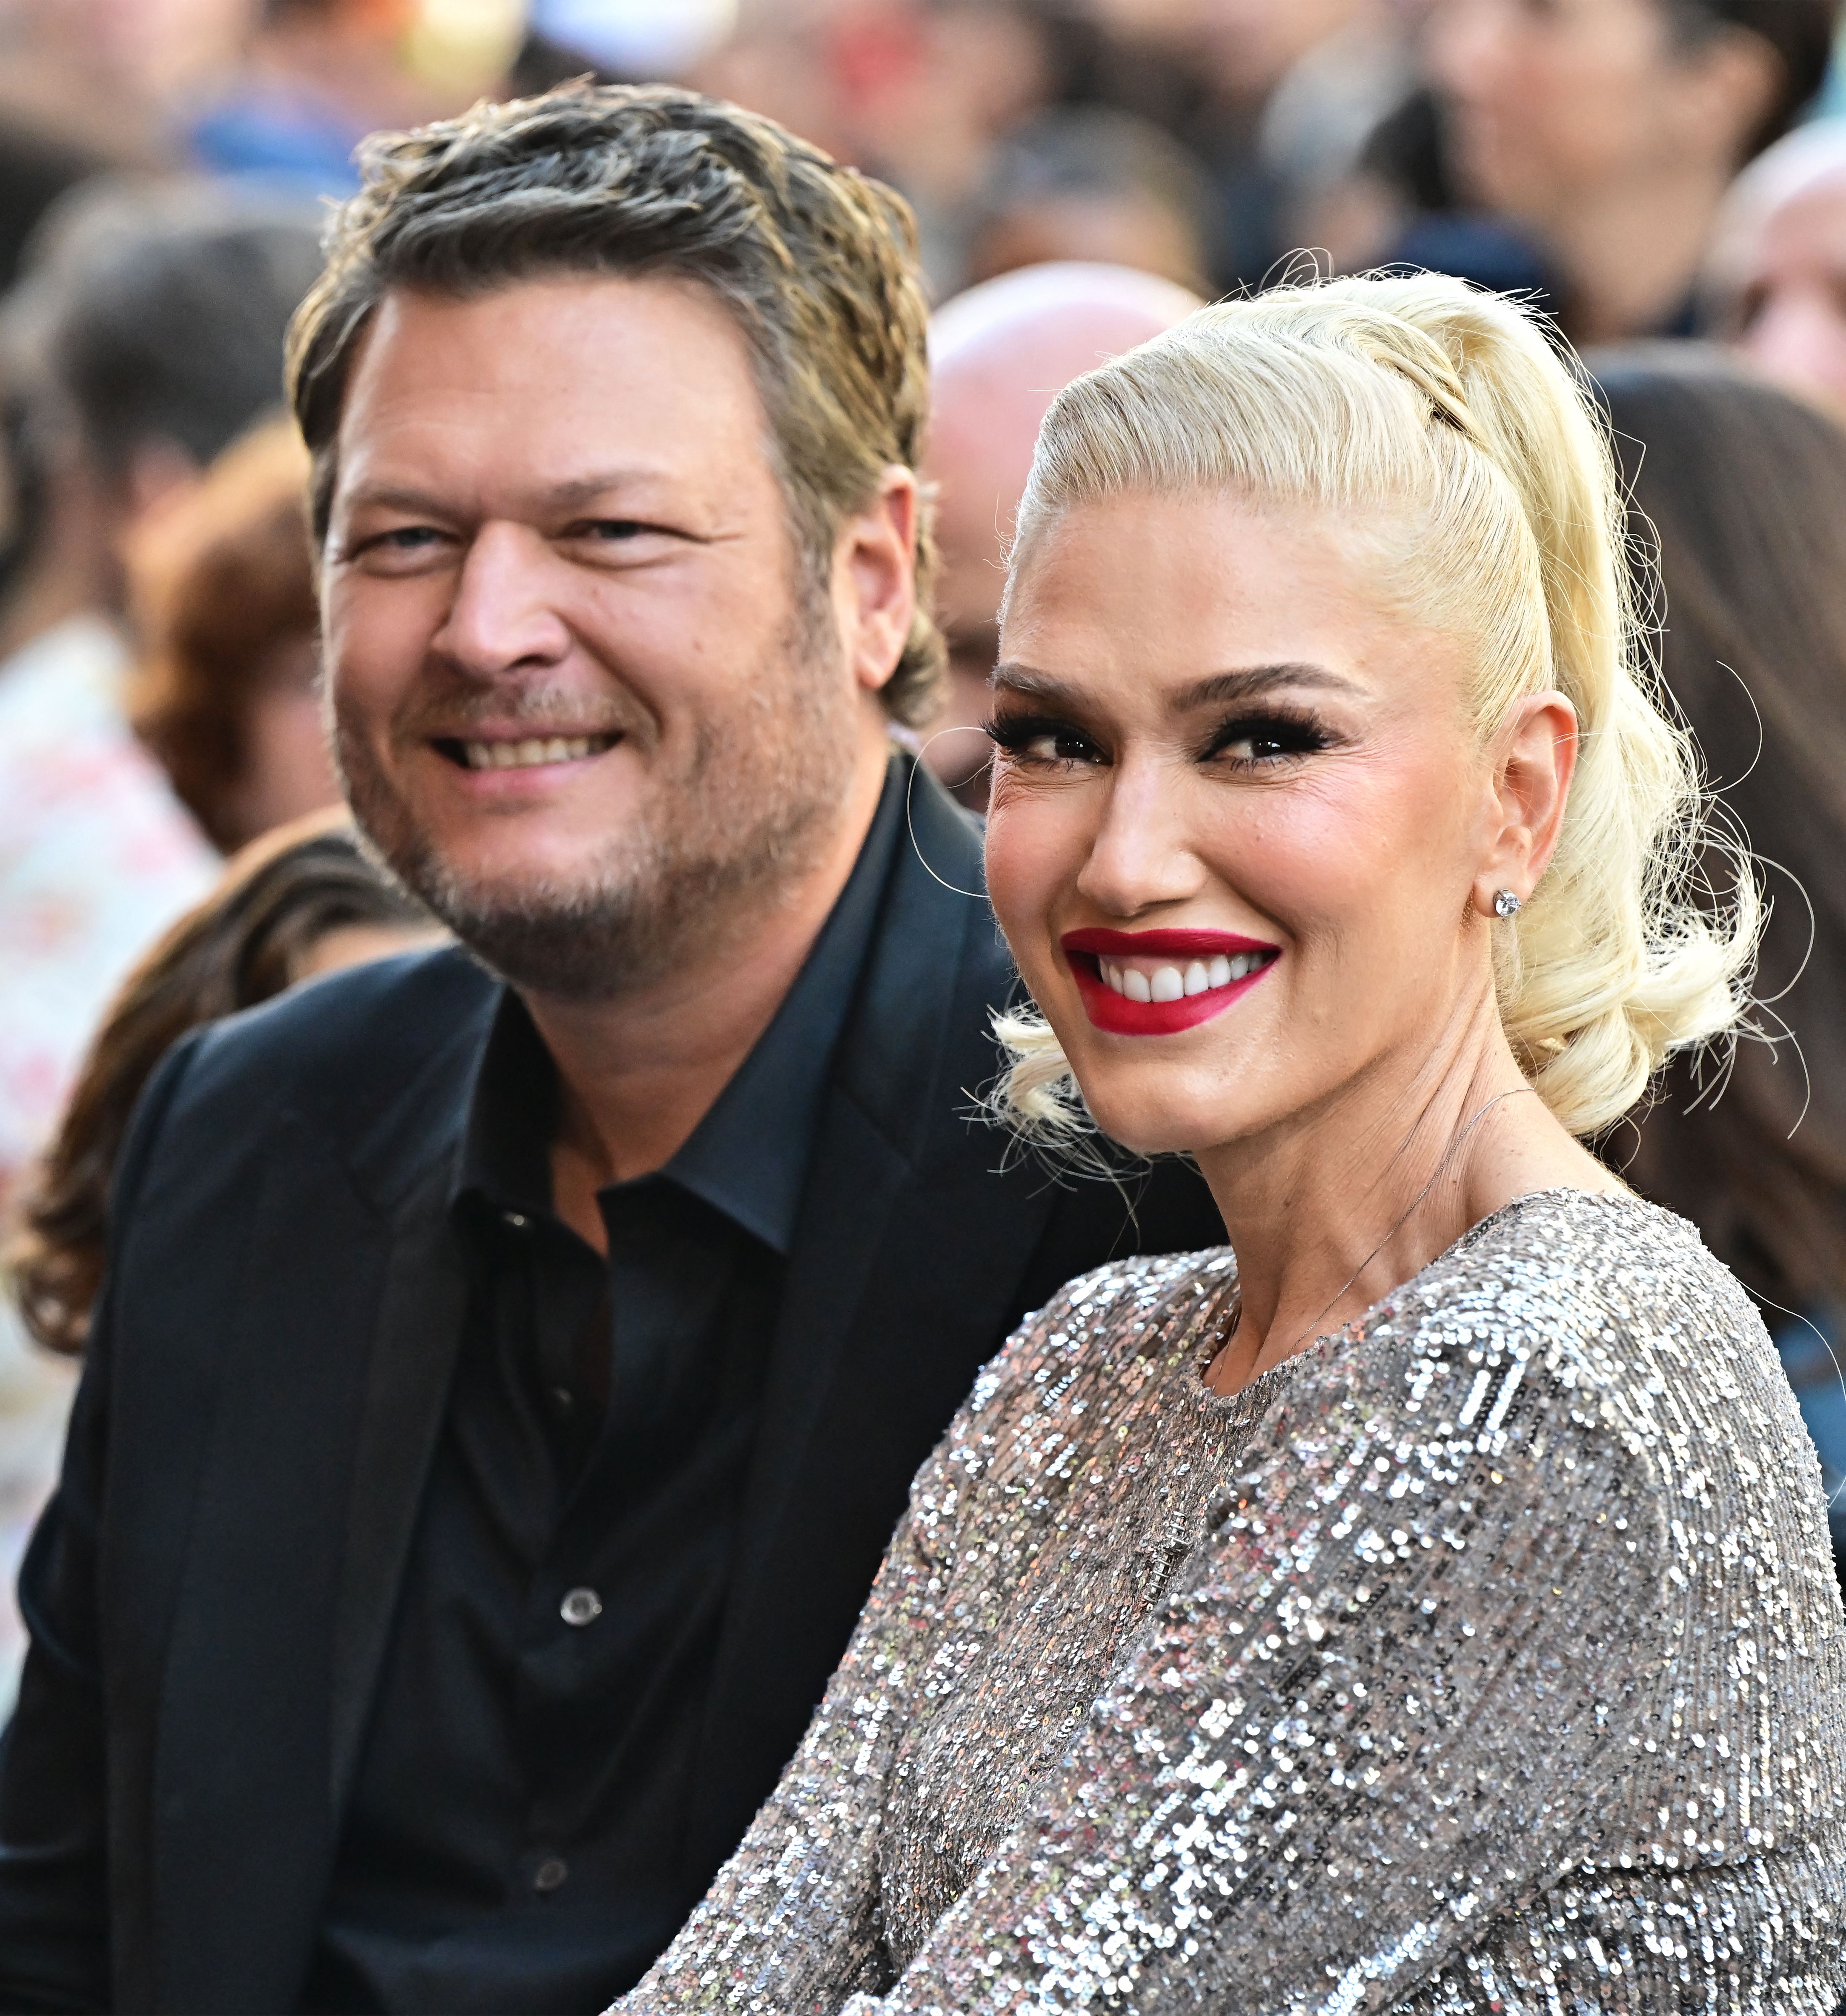 The No Doubt frontwoman said she and Blake will be spending New Years apart this year